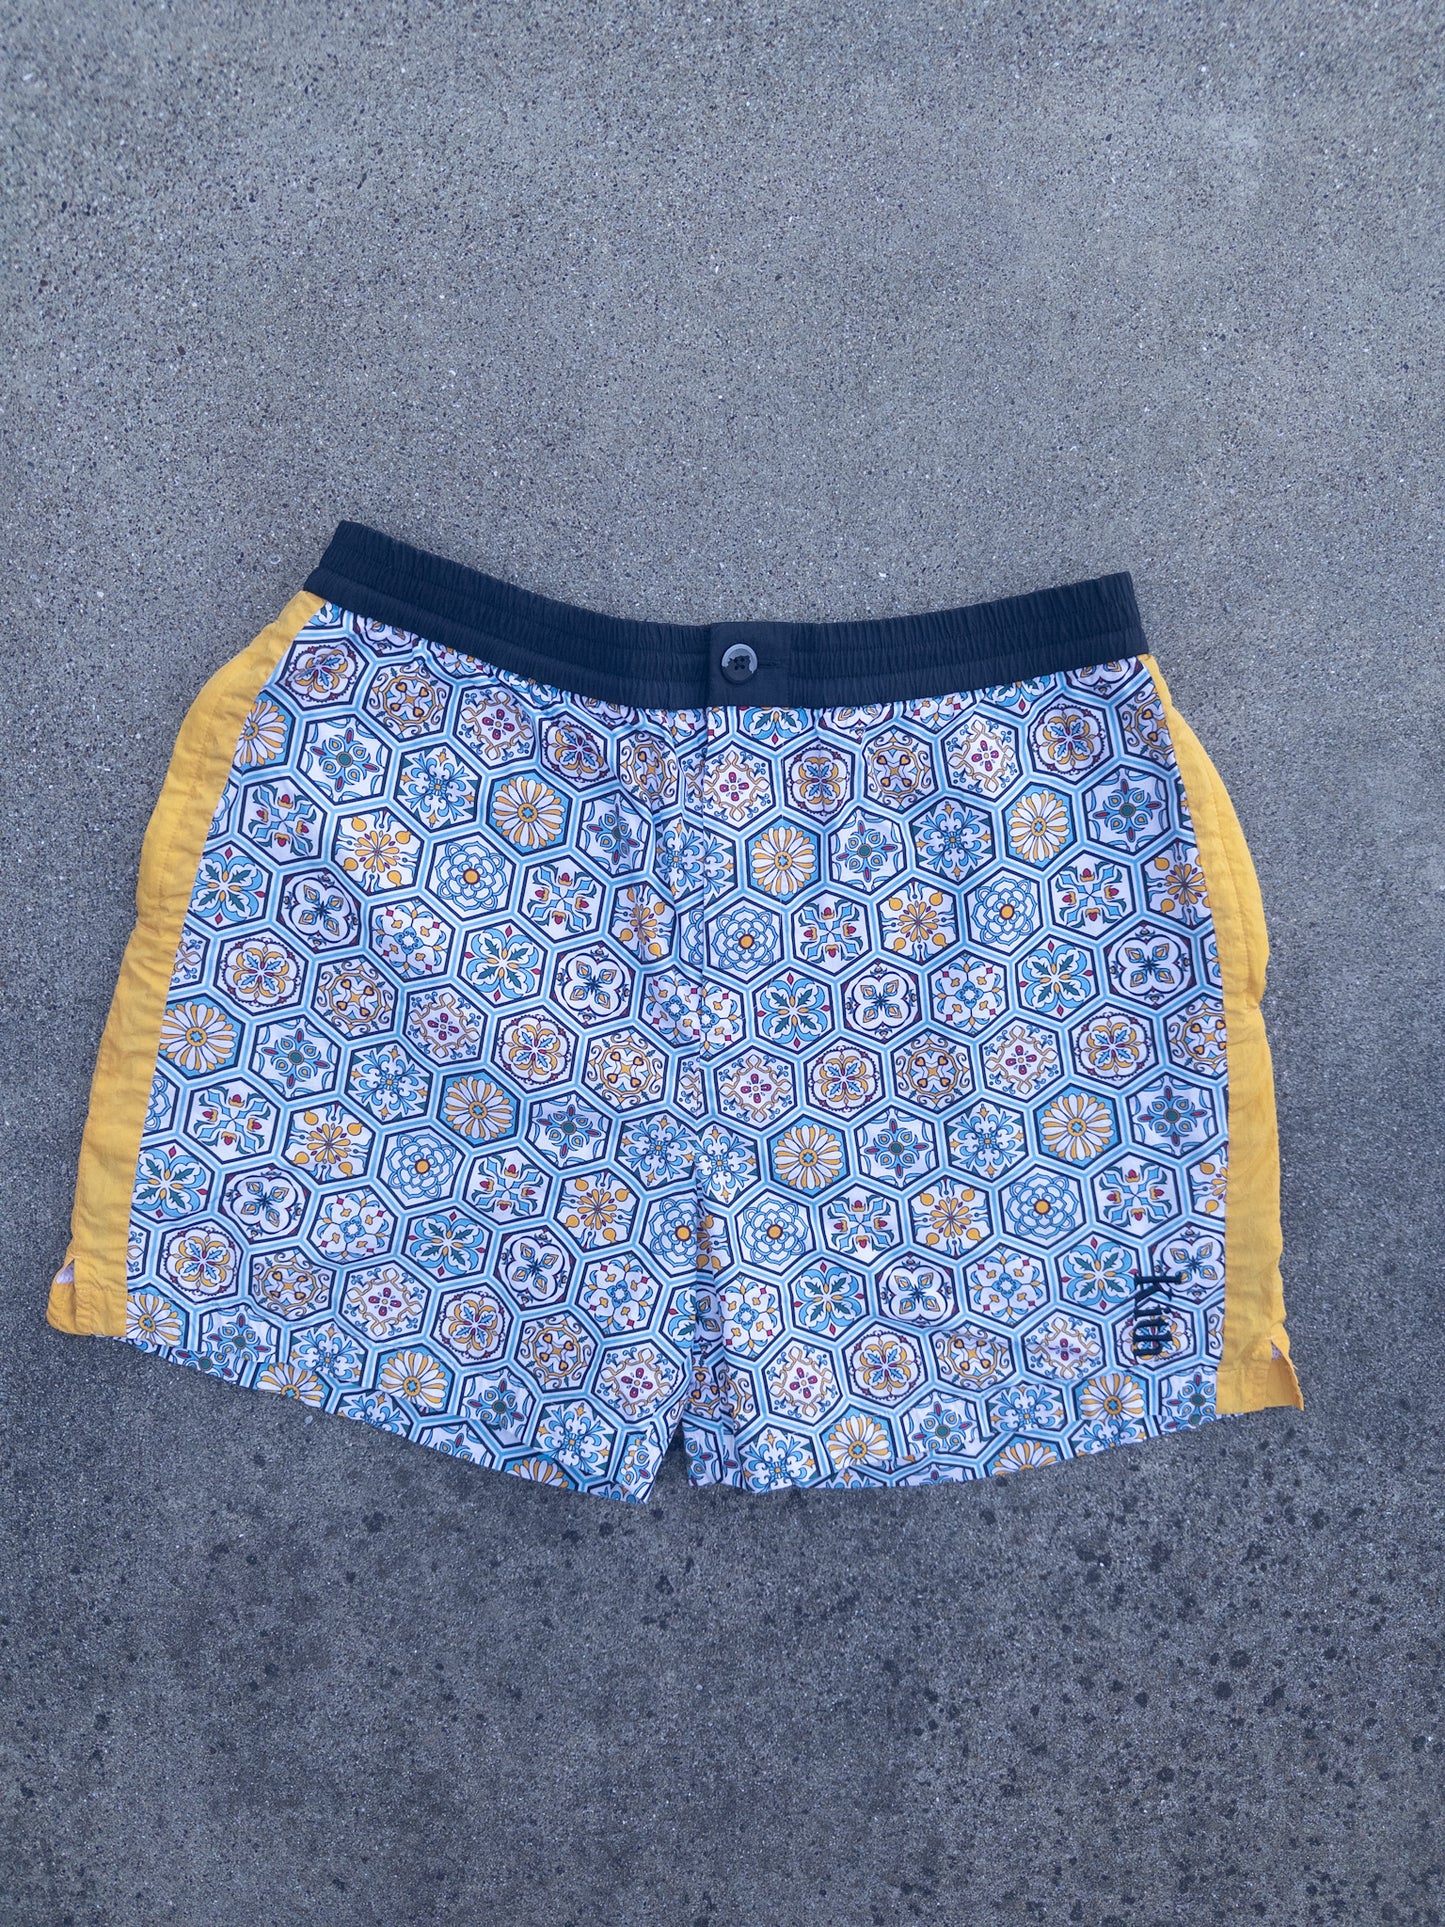 Kith Printed Shorts with Side Panel Size Medium